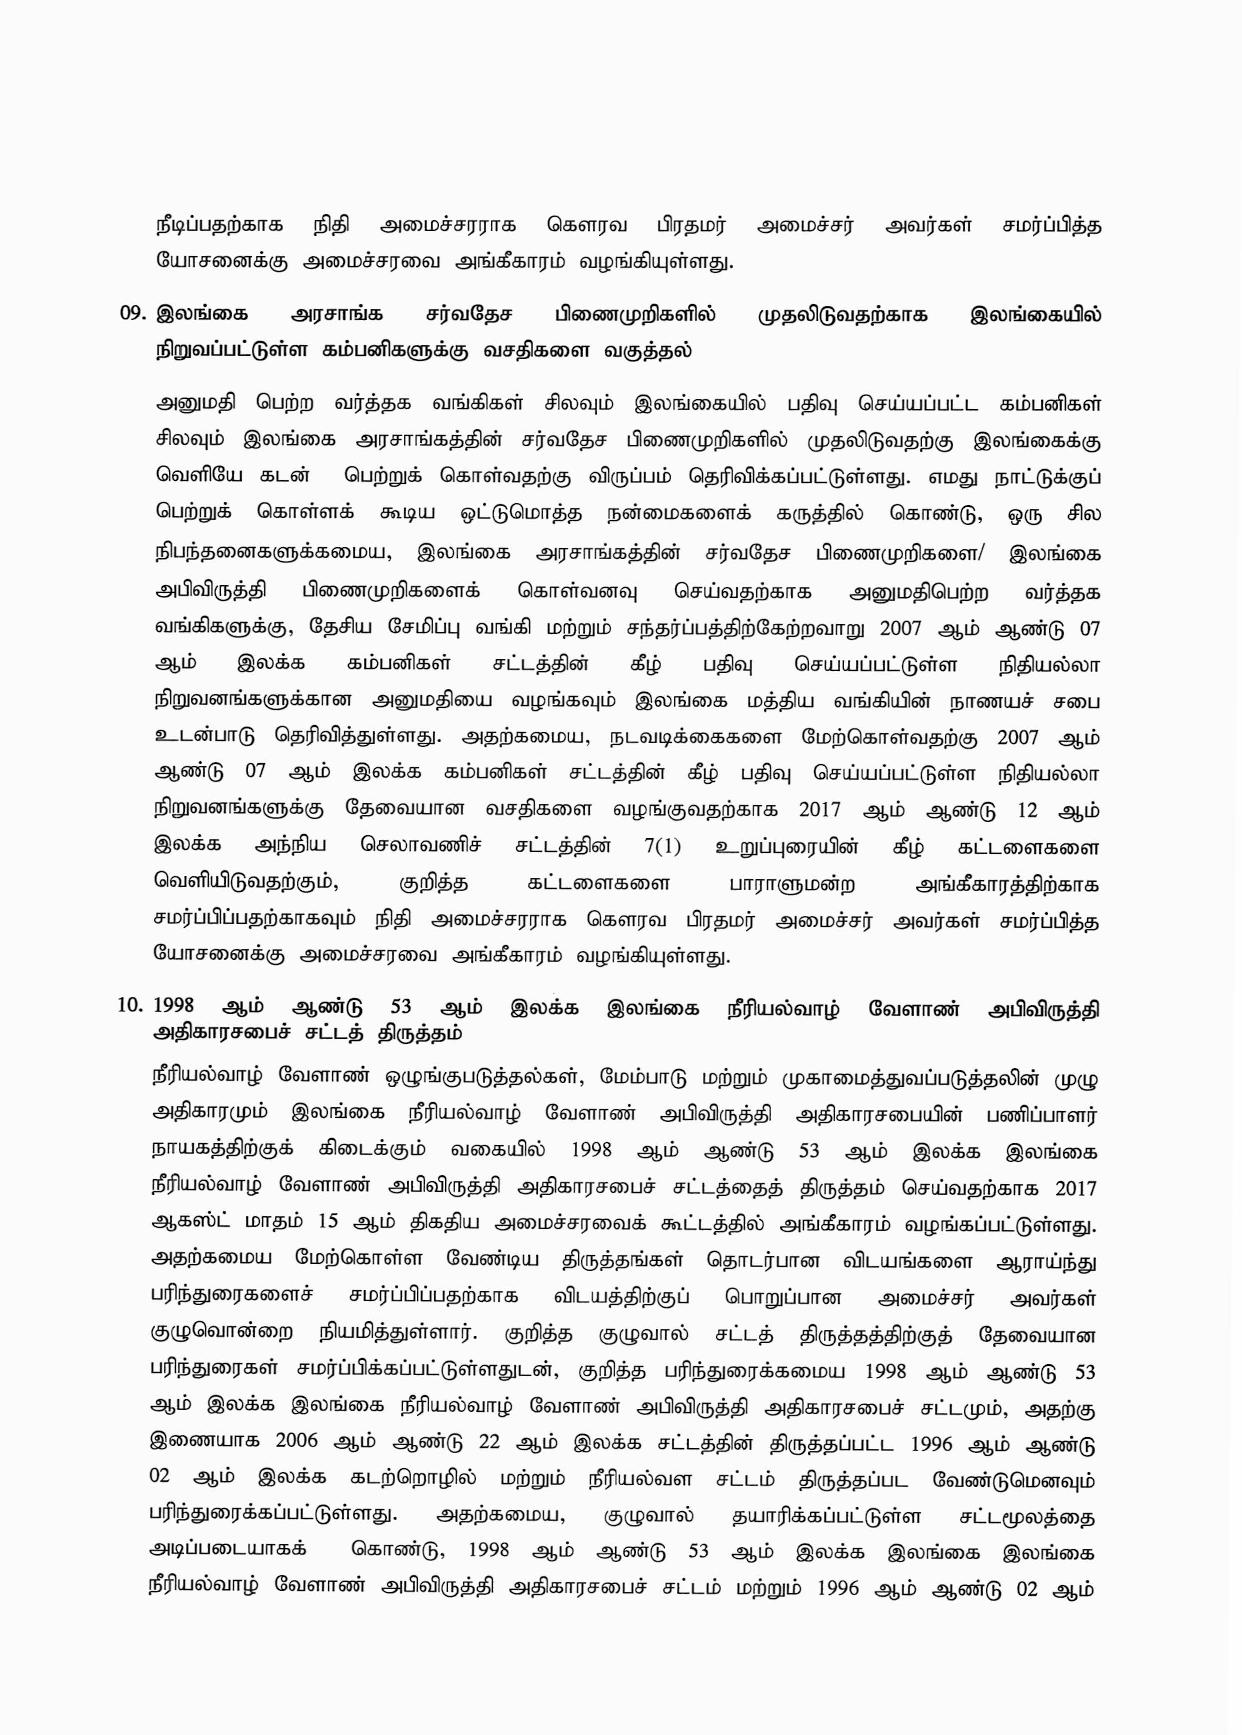 Cabinet Decision on 28.06.2021 Tamil page 005